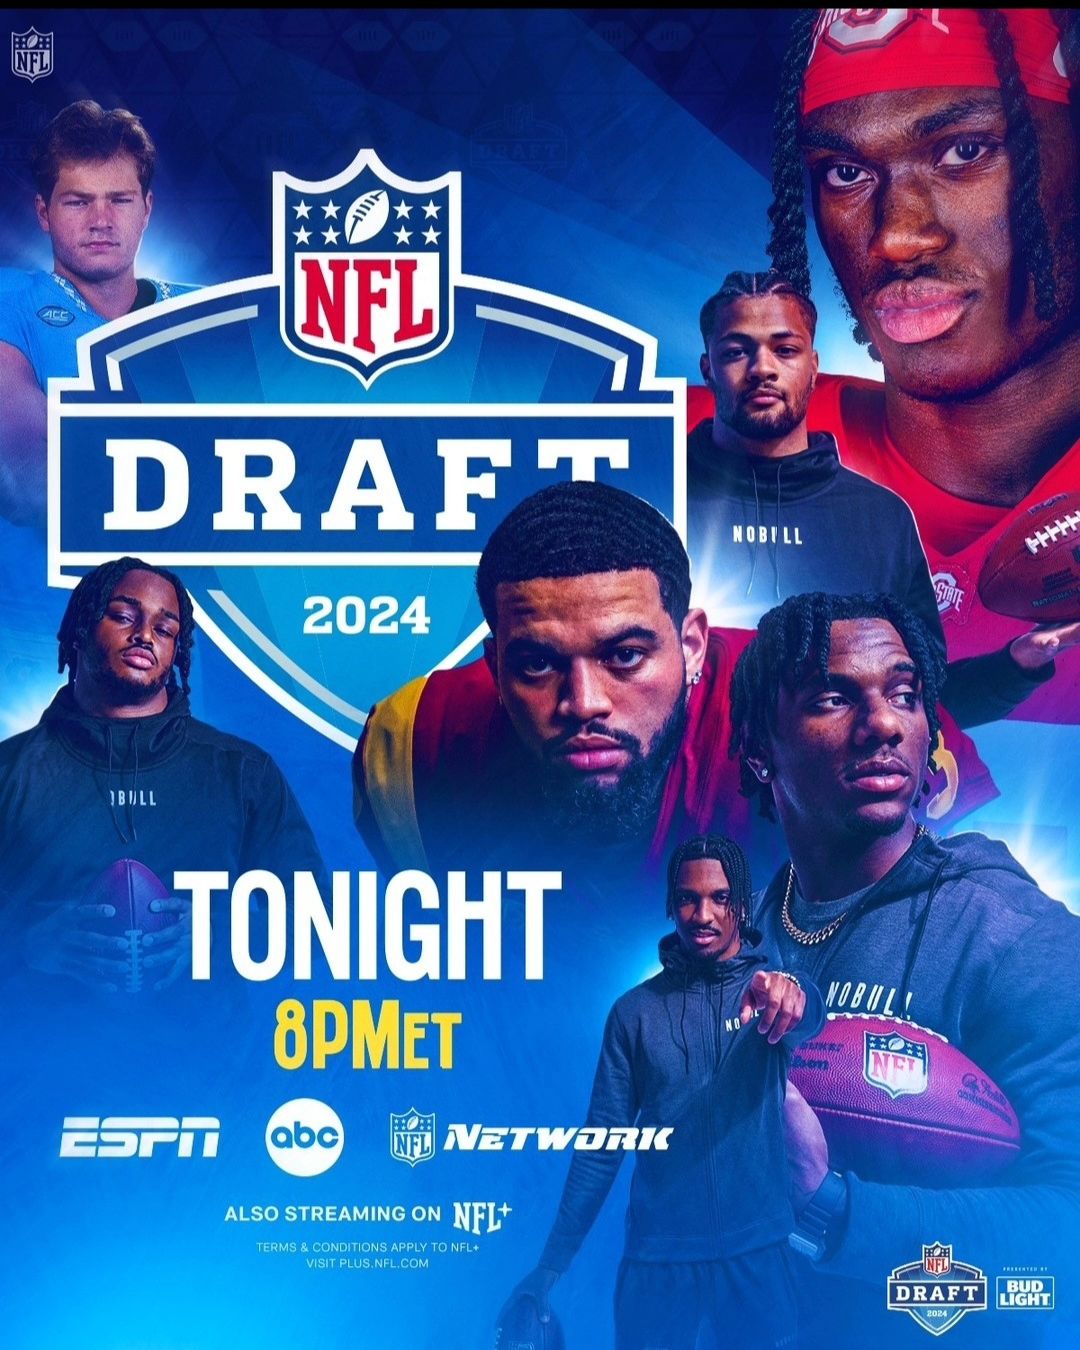 The NFL draft starts tonight with round 1. Who is your top pick? And did you know it's also National Lingerie Day 🤷‍♀️ I think they did that on purpose.